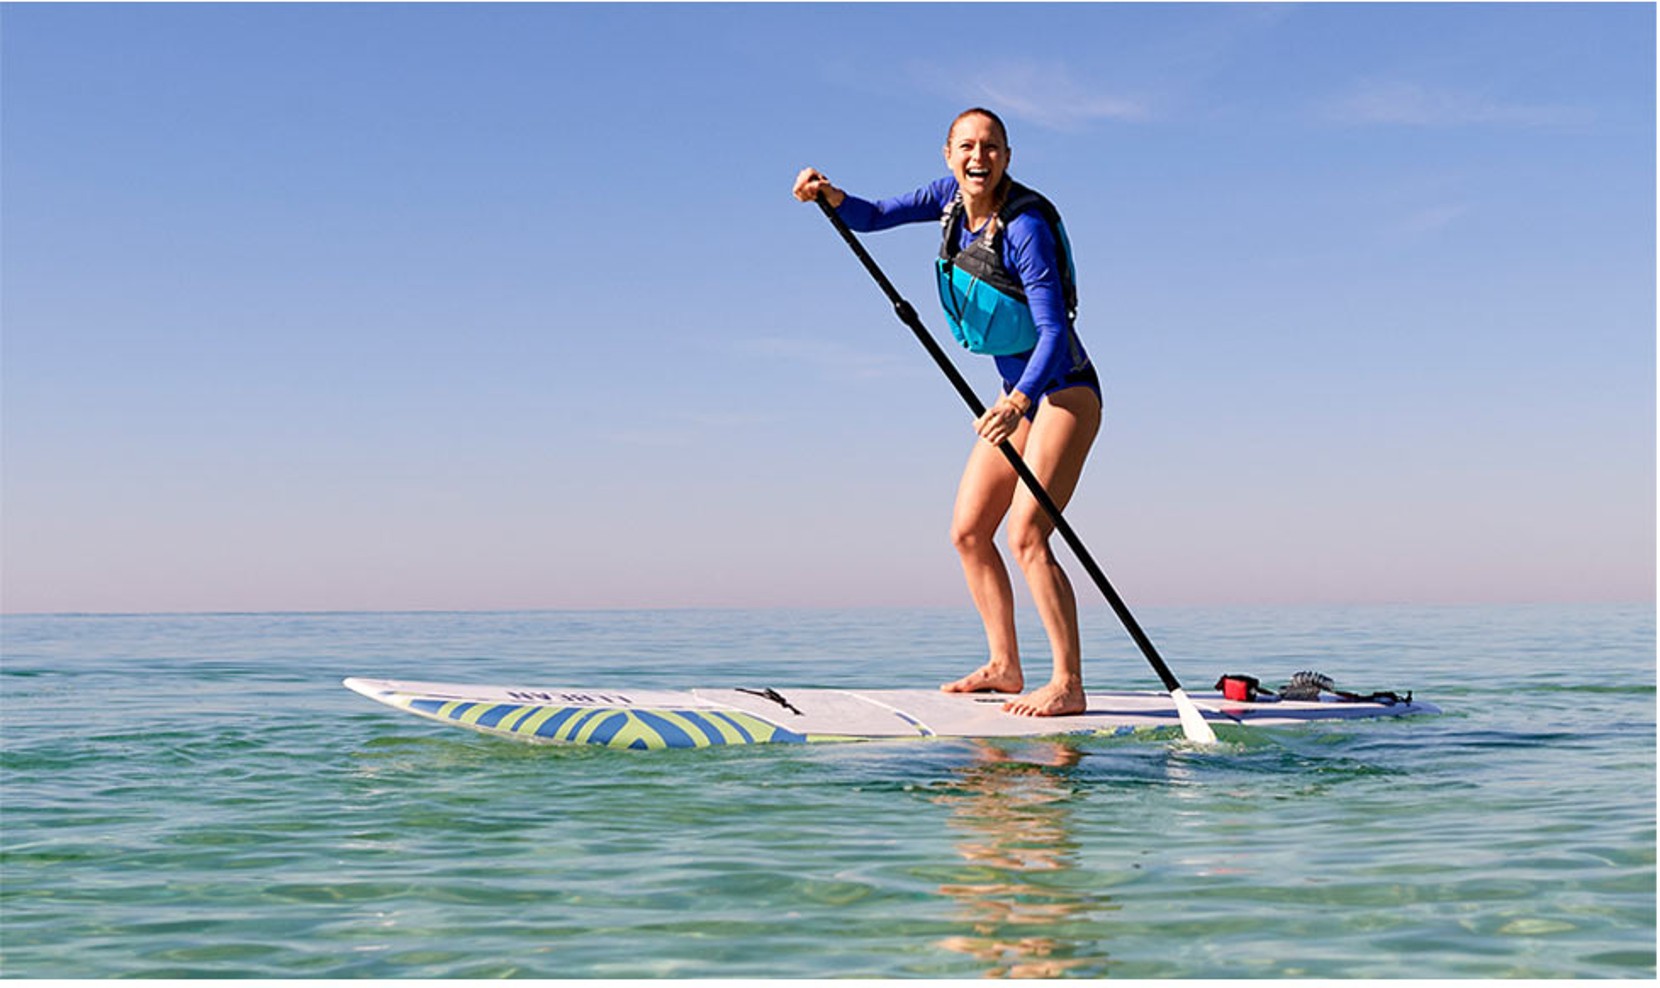 Paddle Like a Pro More durable, stable and affordable than others – so you can enjoy every minute on the water, no matter how experienced you are. 